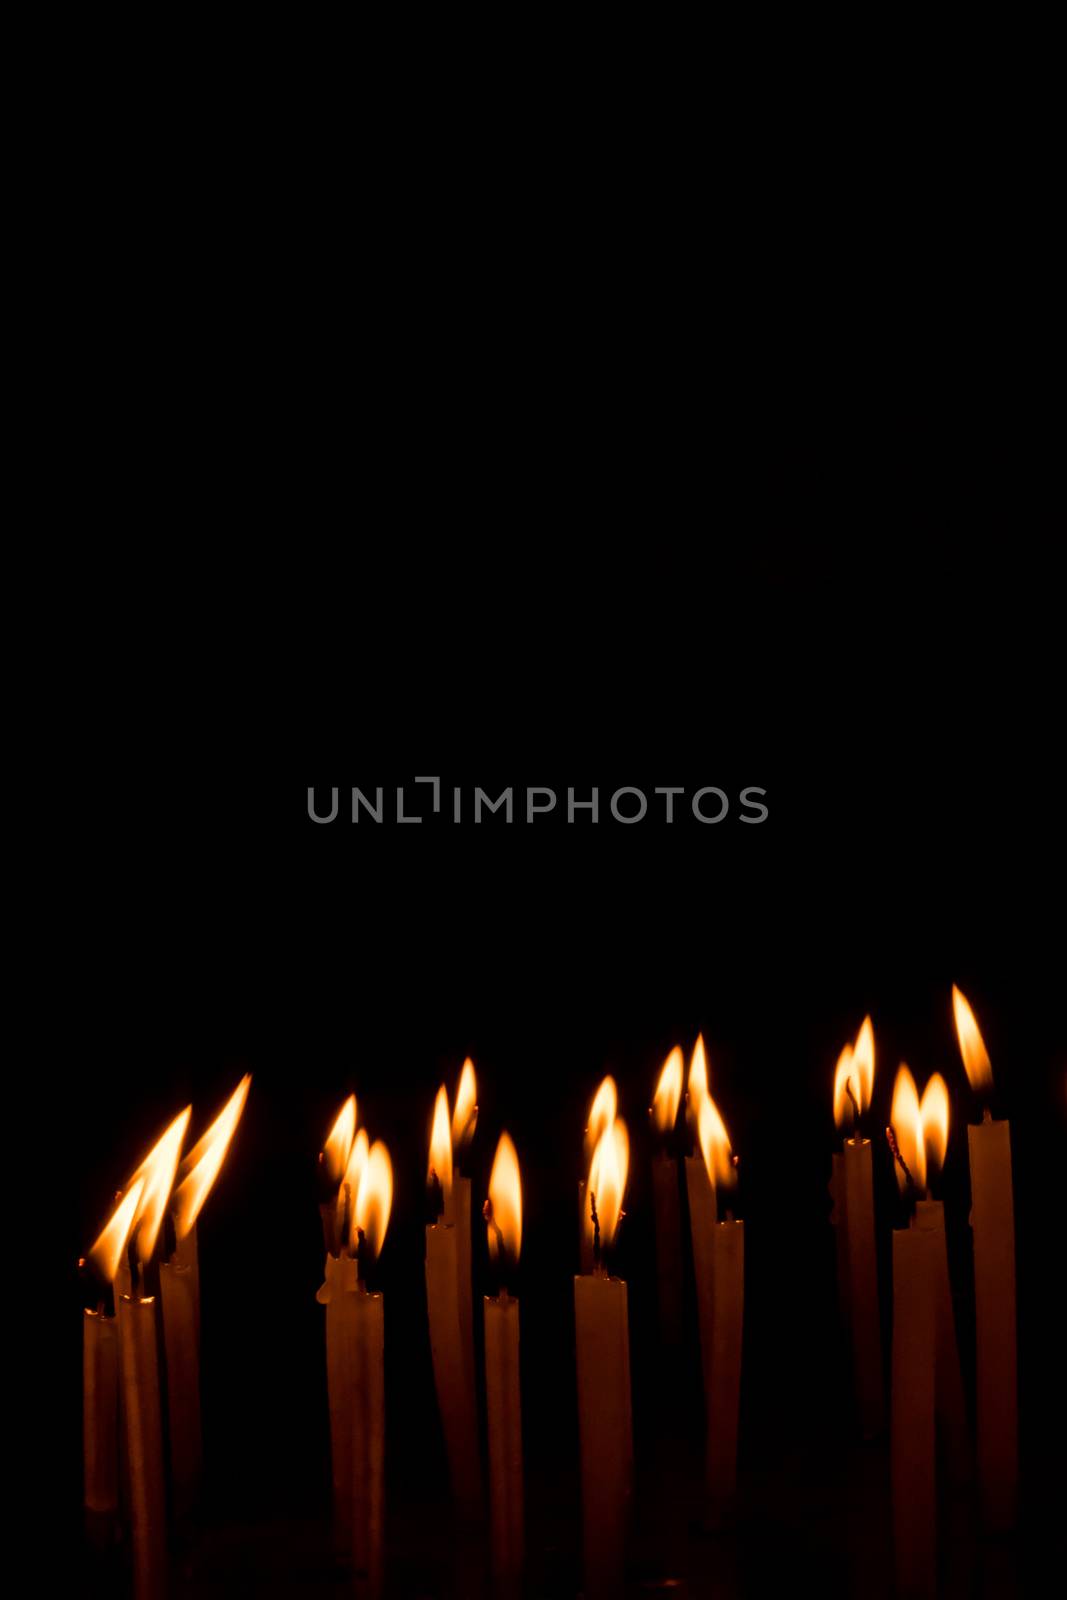 Many christmas candles burning at night on the black background. by sudiptabhowmick